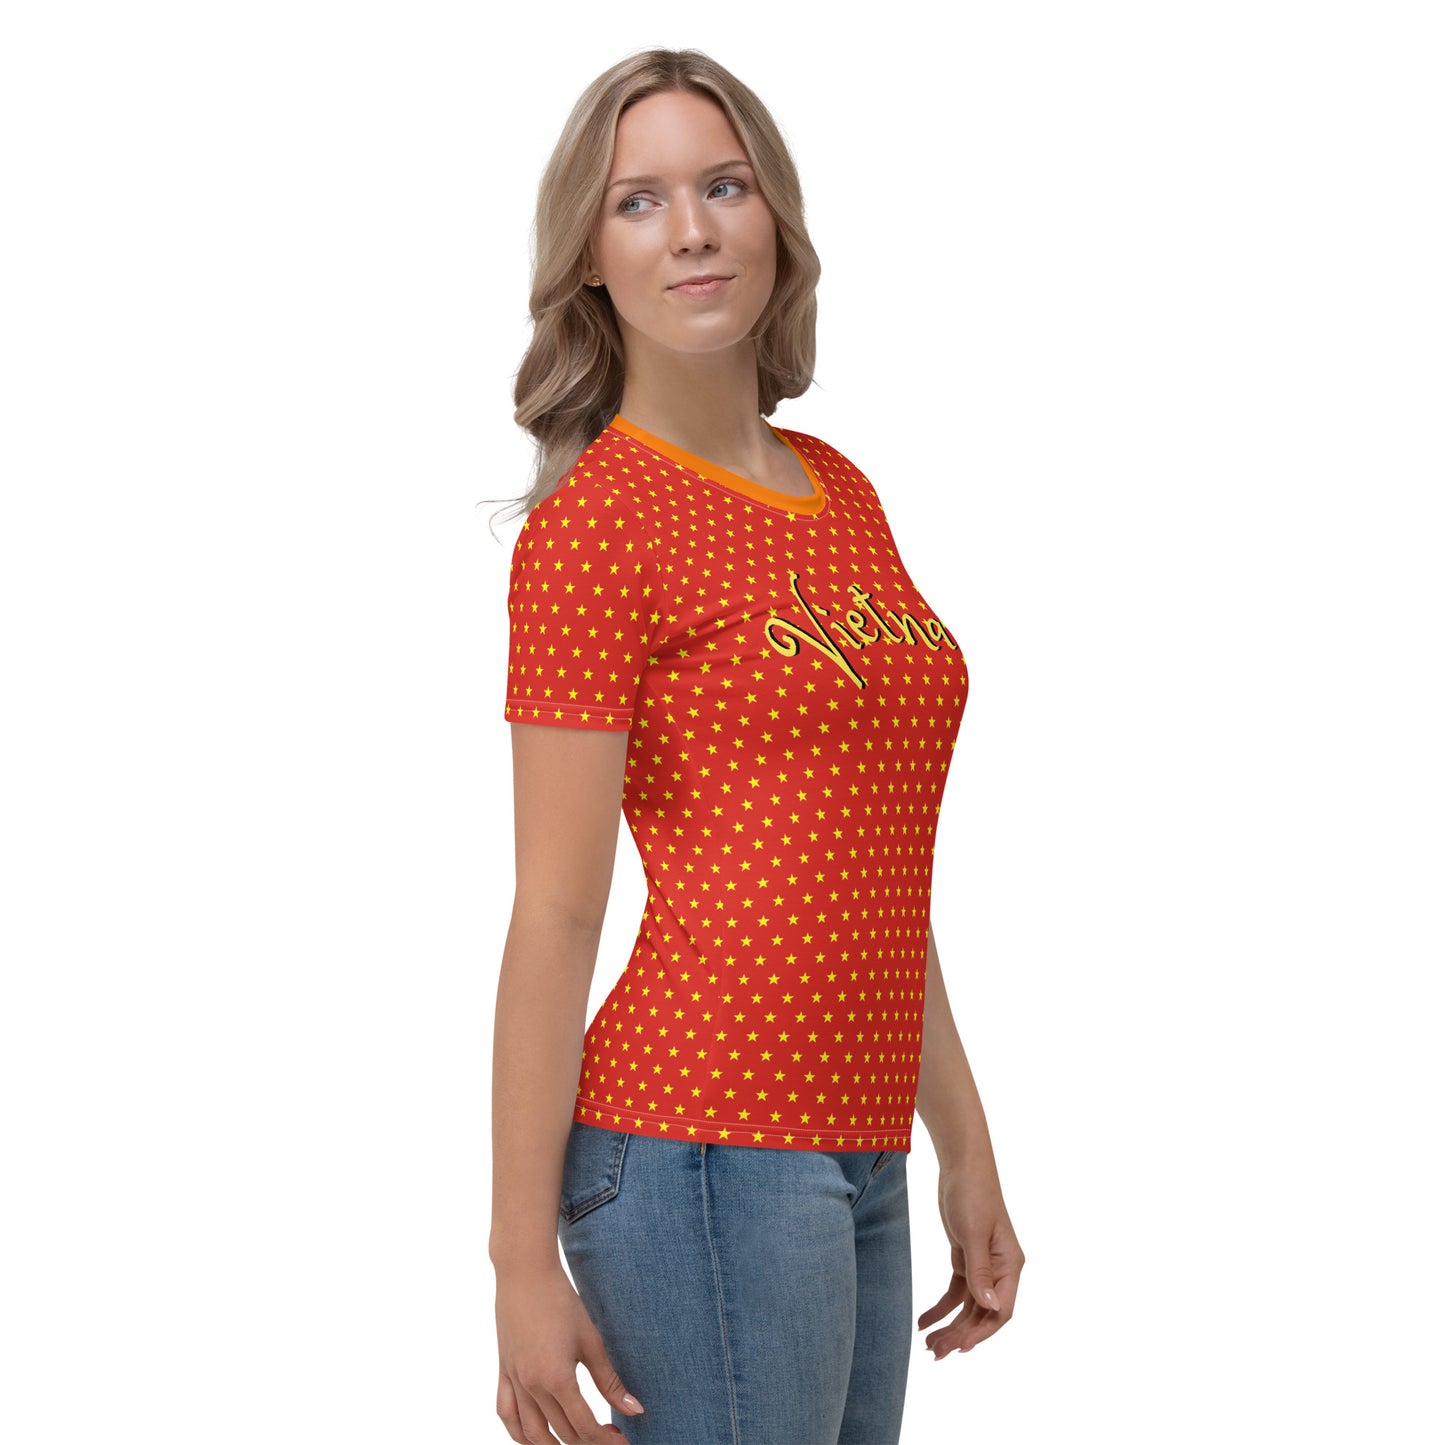 Celebrate Vietnam with this Yellow Polka Dot T-Shirt for Women